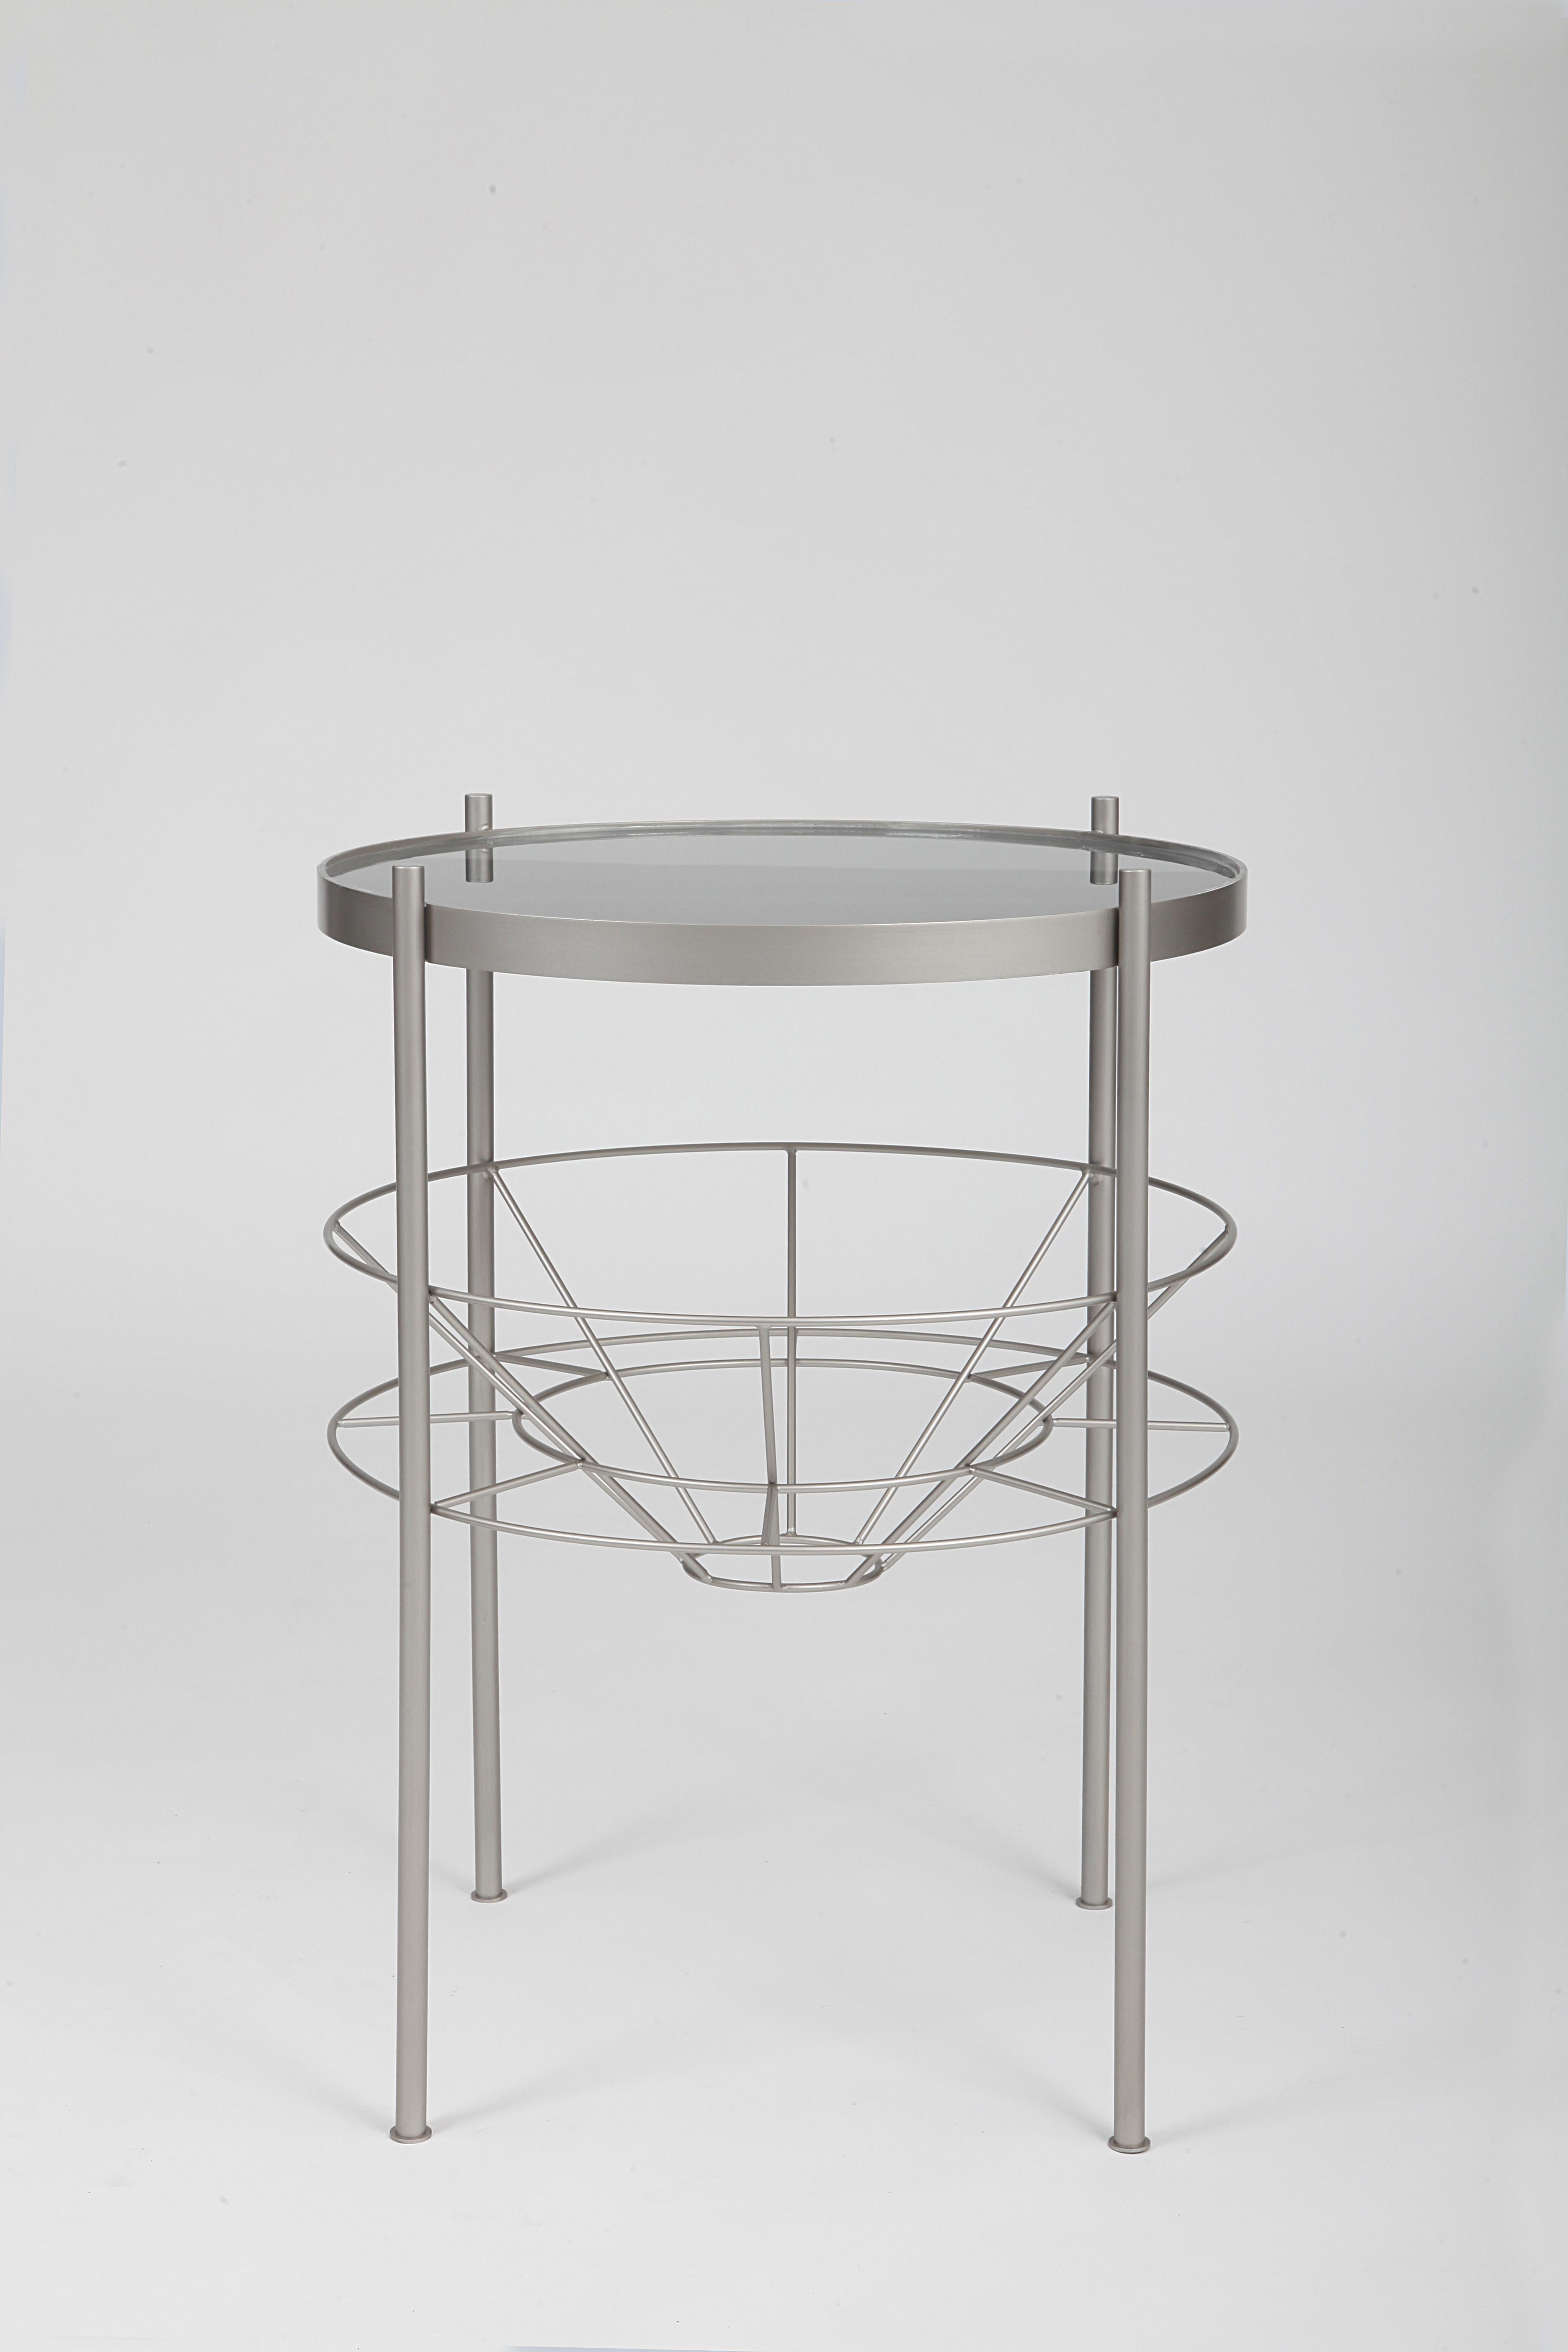 Silos Side Table by Dalmoto
Dimensions: Ø 54 x H 67 cm.
Materials: Nichel Marino nickel and resin.

Available in different metal and resin options. Available in two sizes. Please contact us. 

Silo and Olis are metal coffee tables with a resin top.